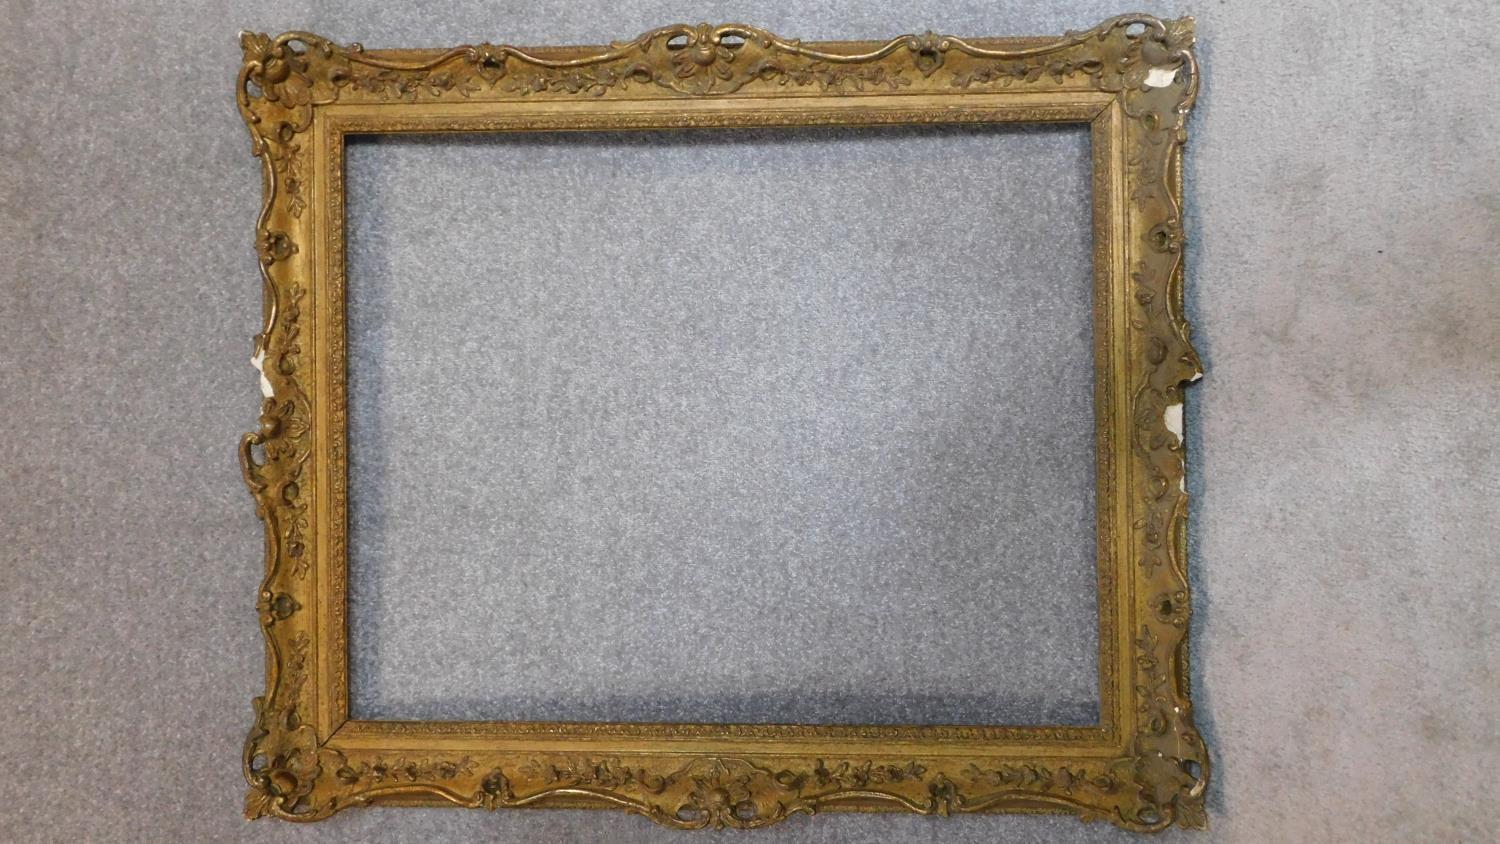 A large 19th century vacant gilt wood and gesso picture frame, 116 x 94cm - outer, 92 x 74cm - inner